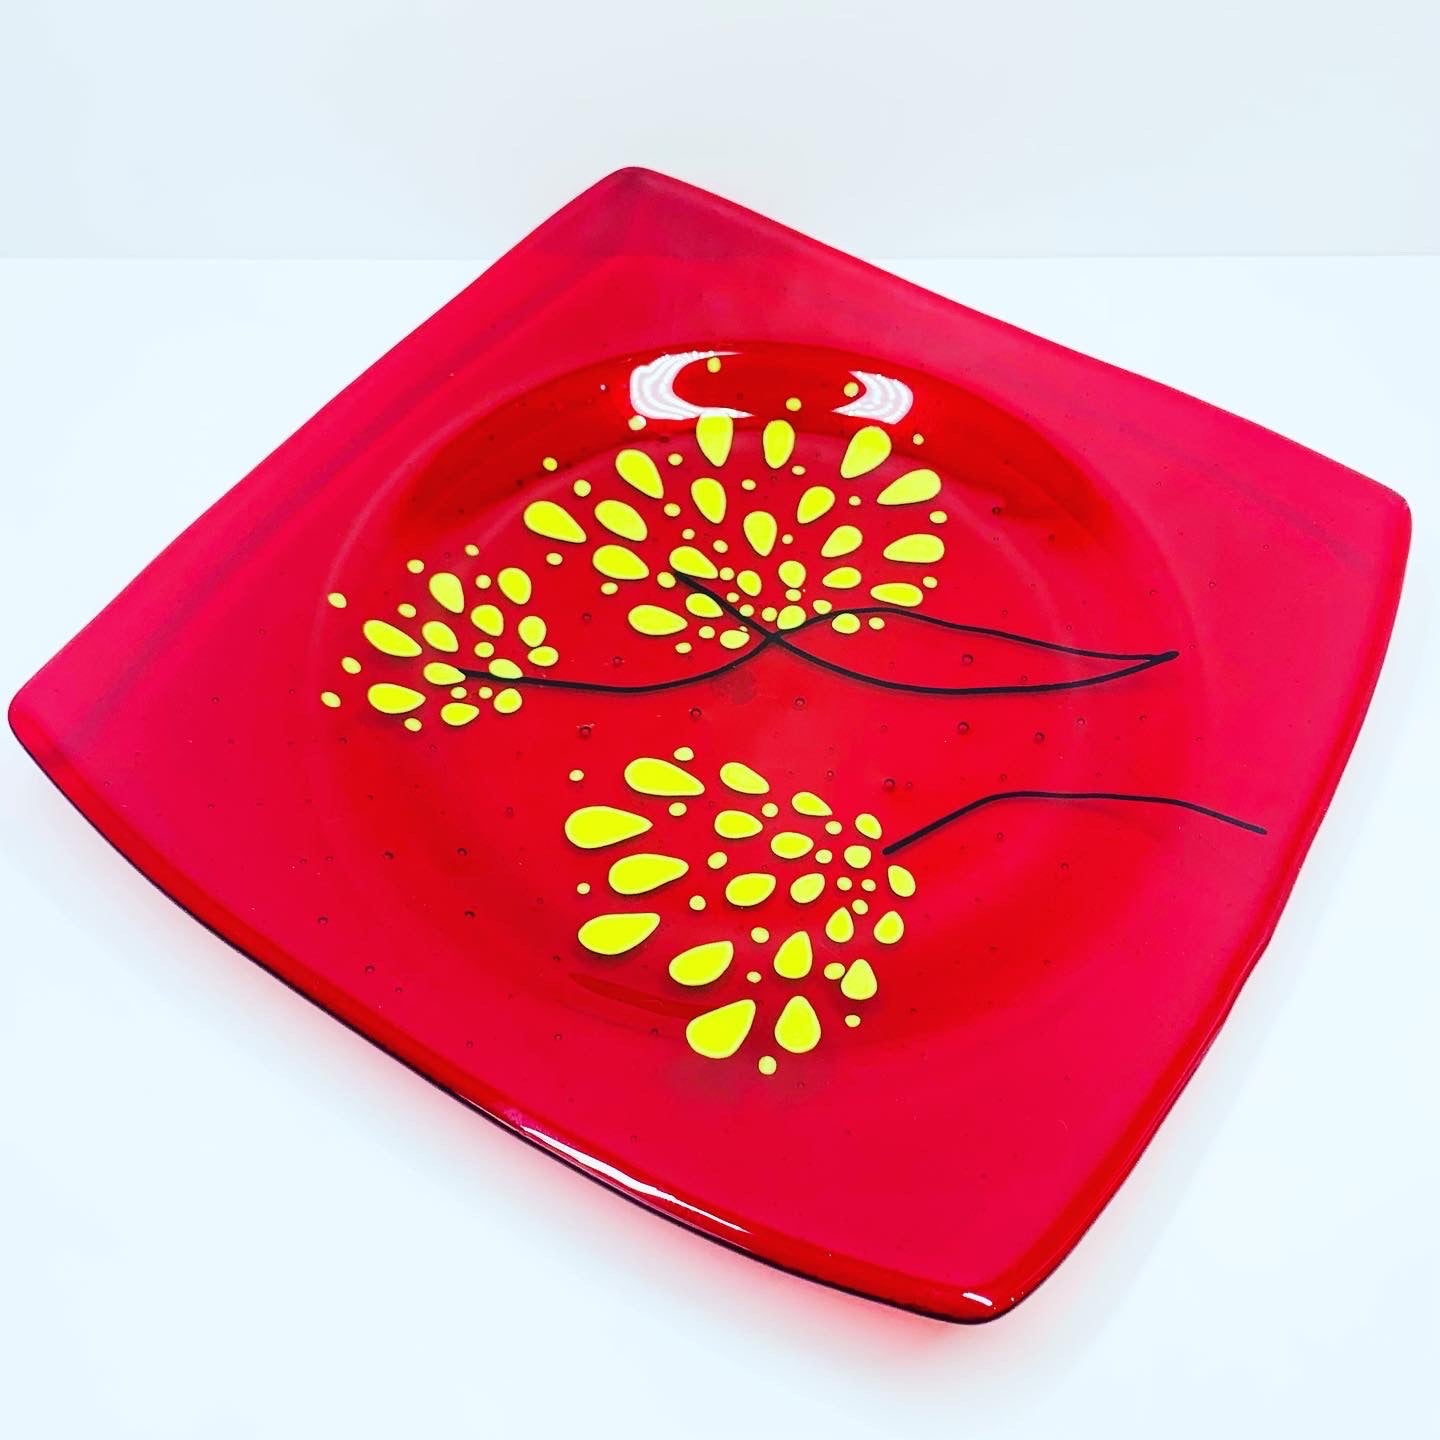 1980s Hand made in New Zealand red decorative glass platter